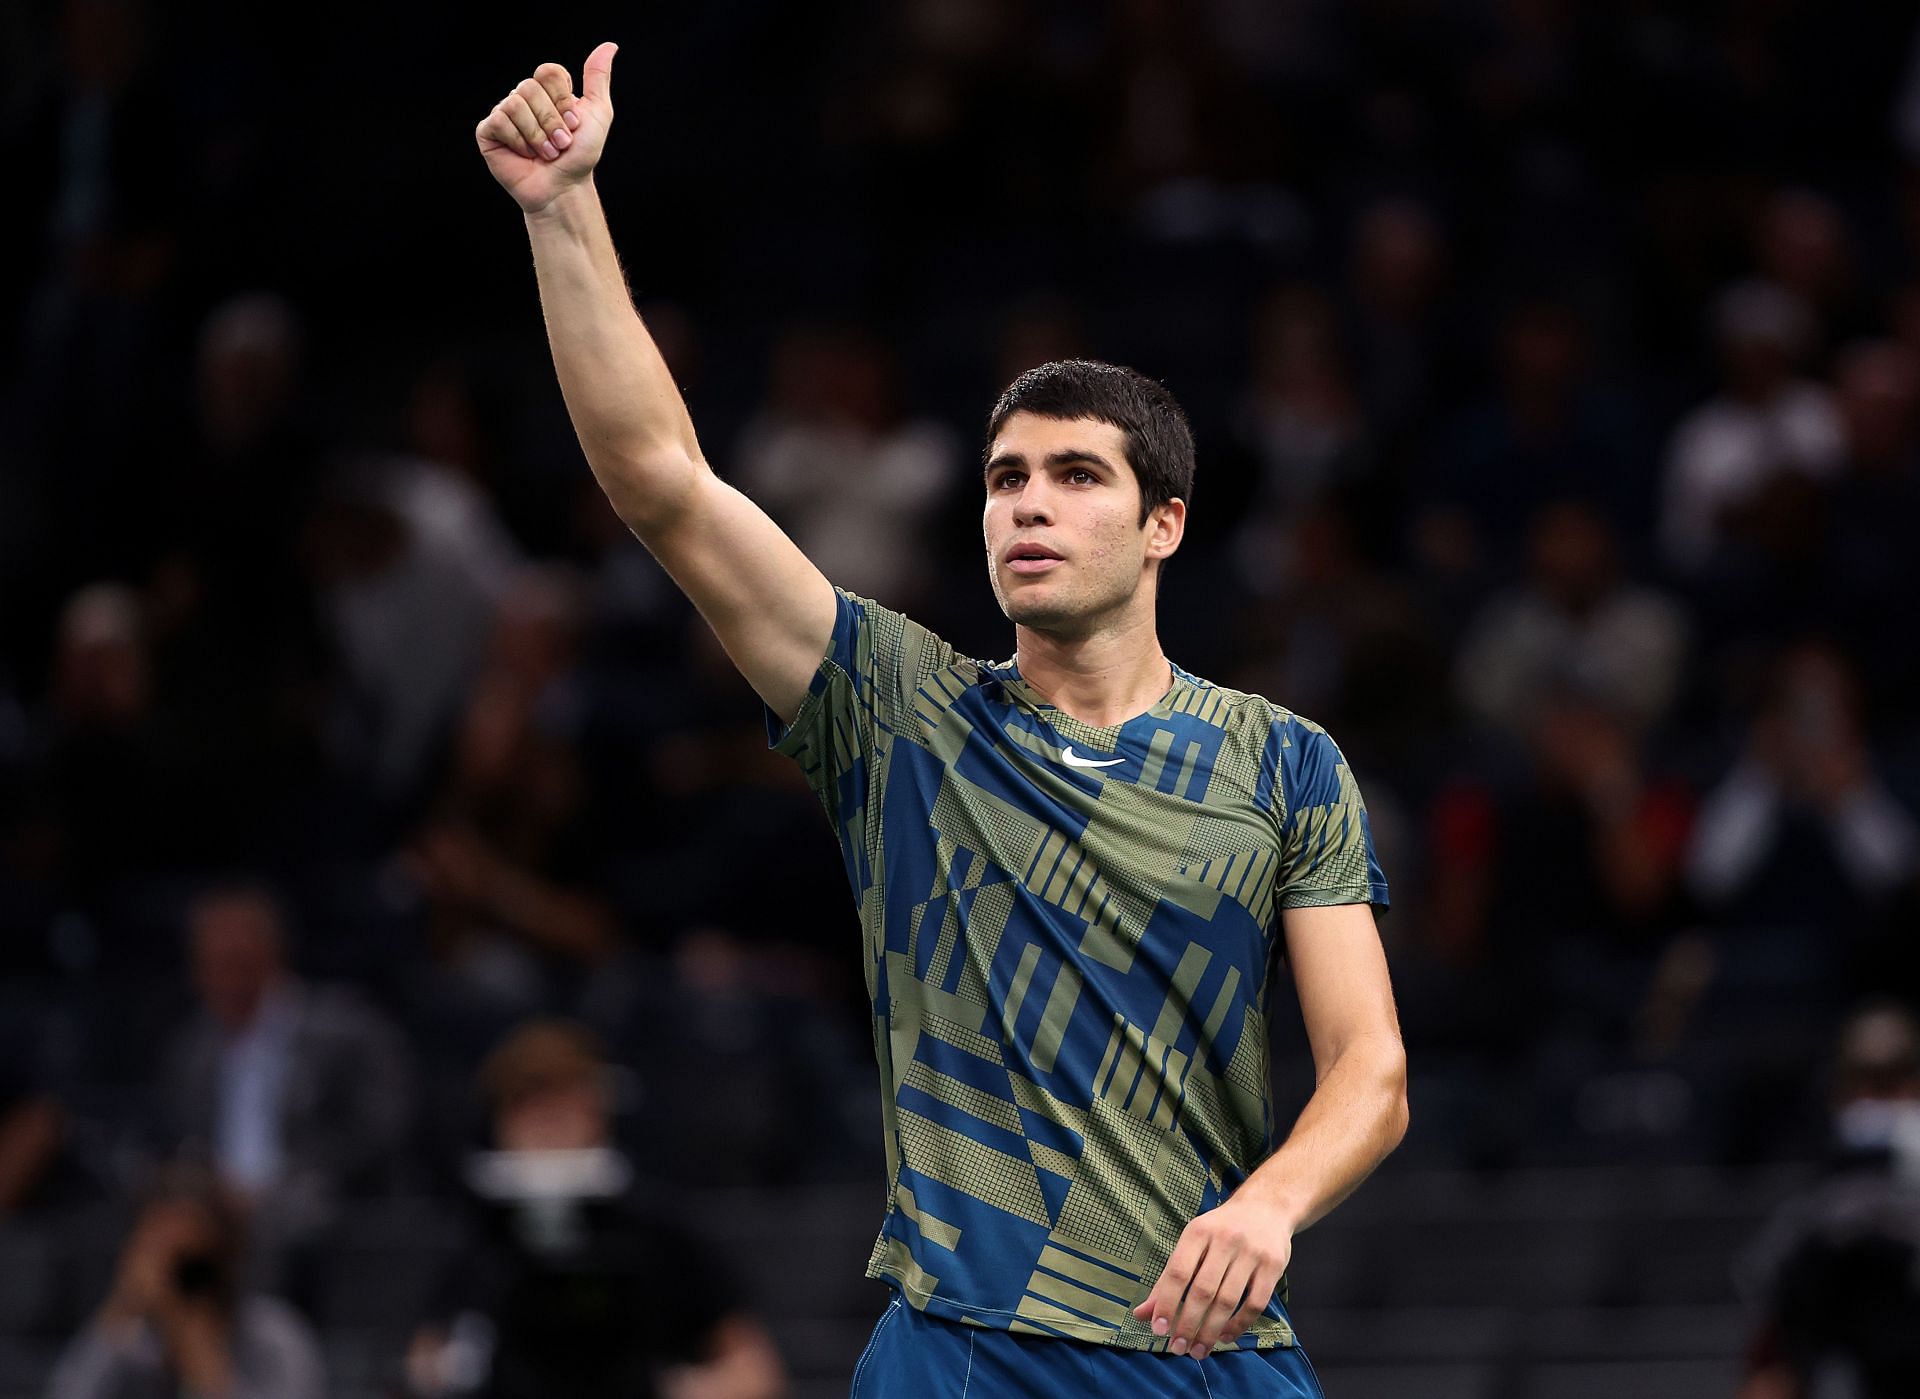 Paris Masters 2022 TV Schedule When are Novak Djokovic and Carlos Alcaraz playing? Day 5, Quarterfinals